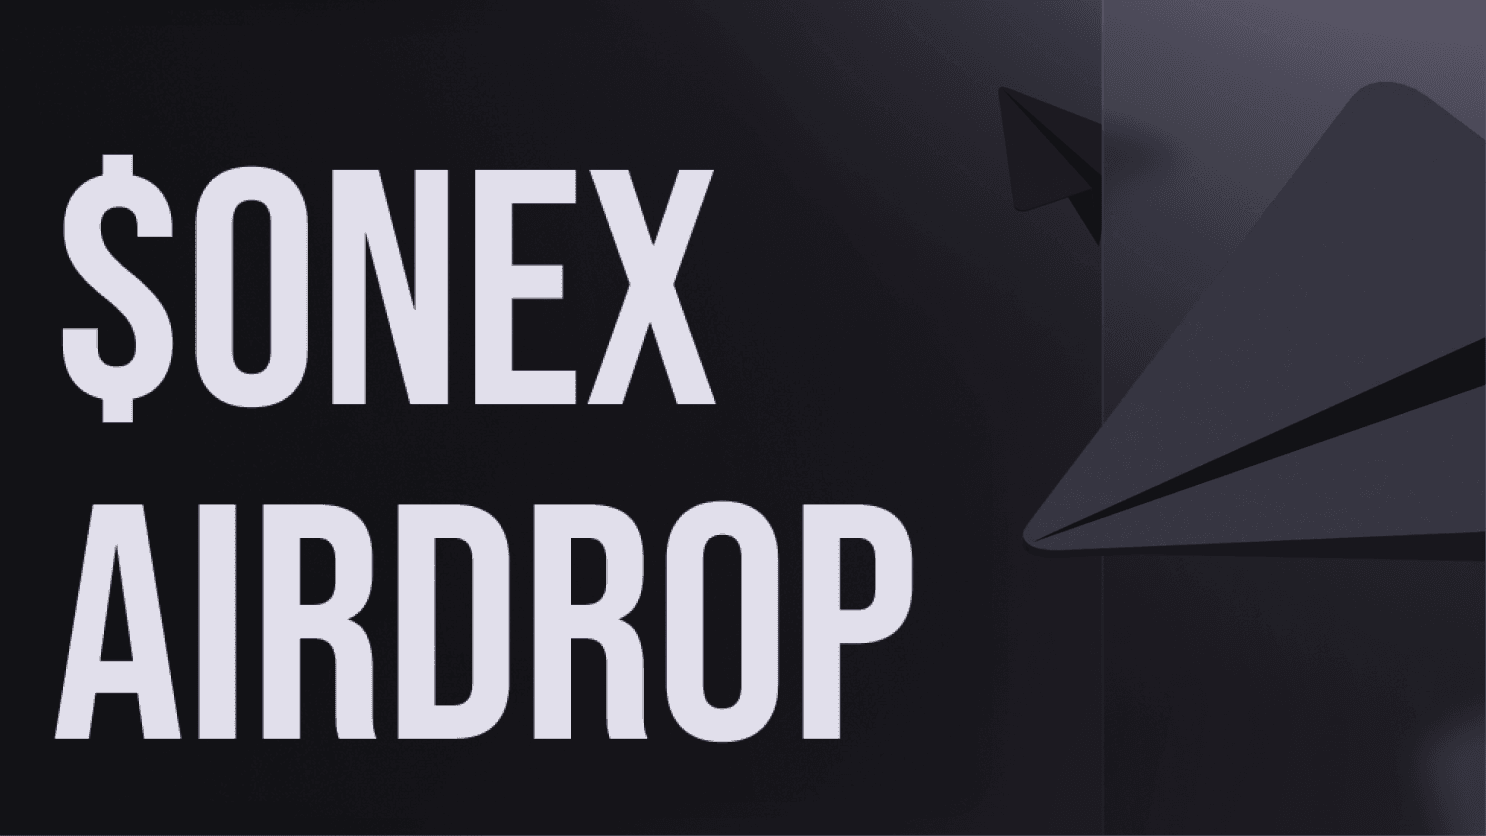 The $ONEX Airdrop to $NOM Stakers